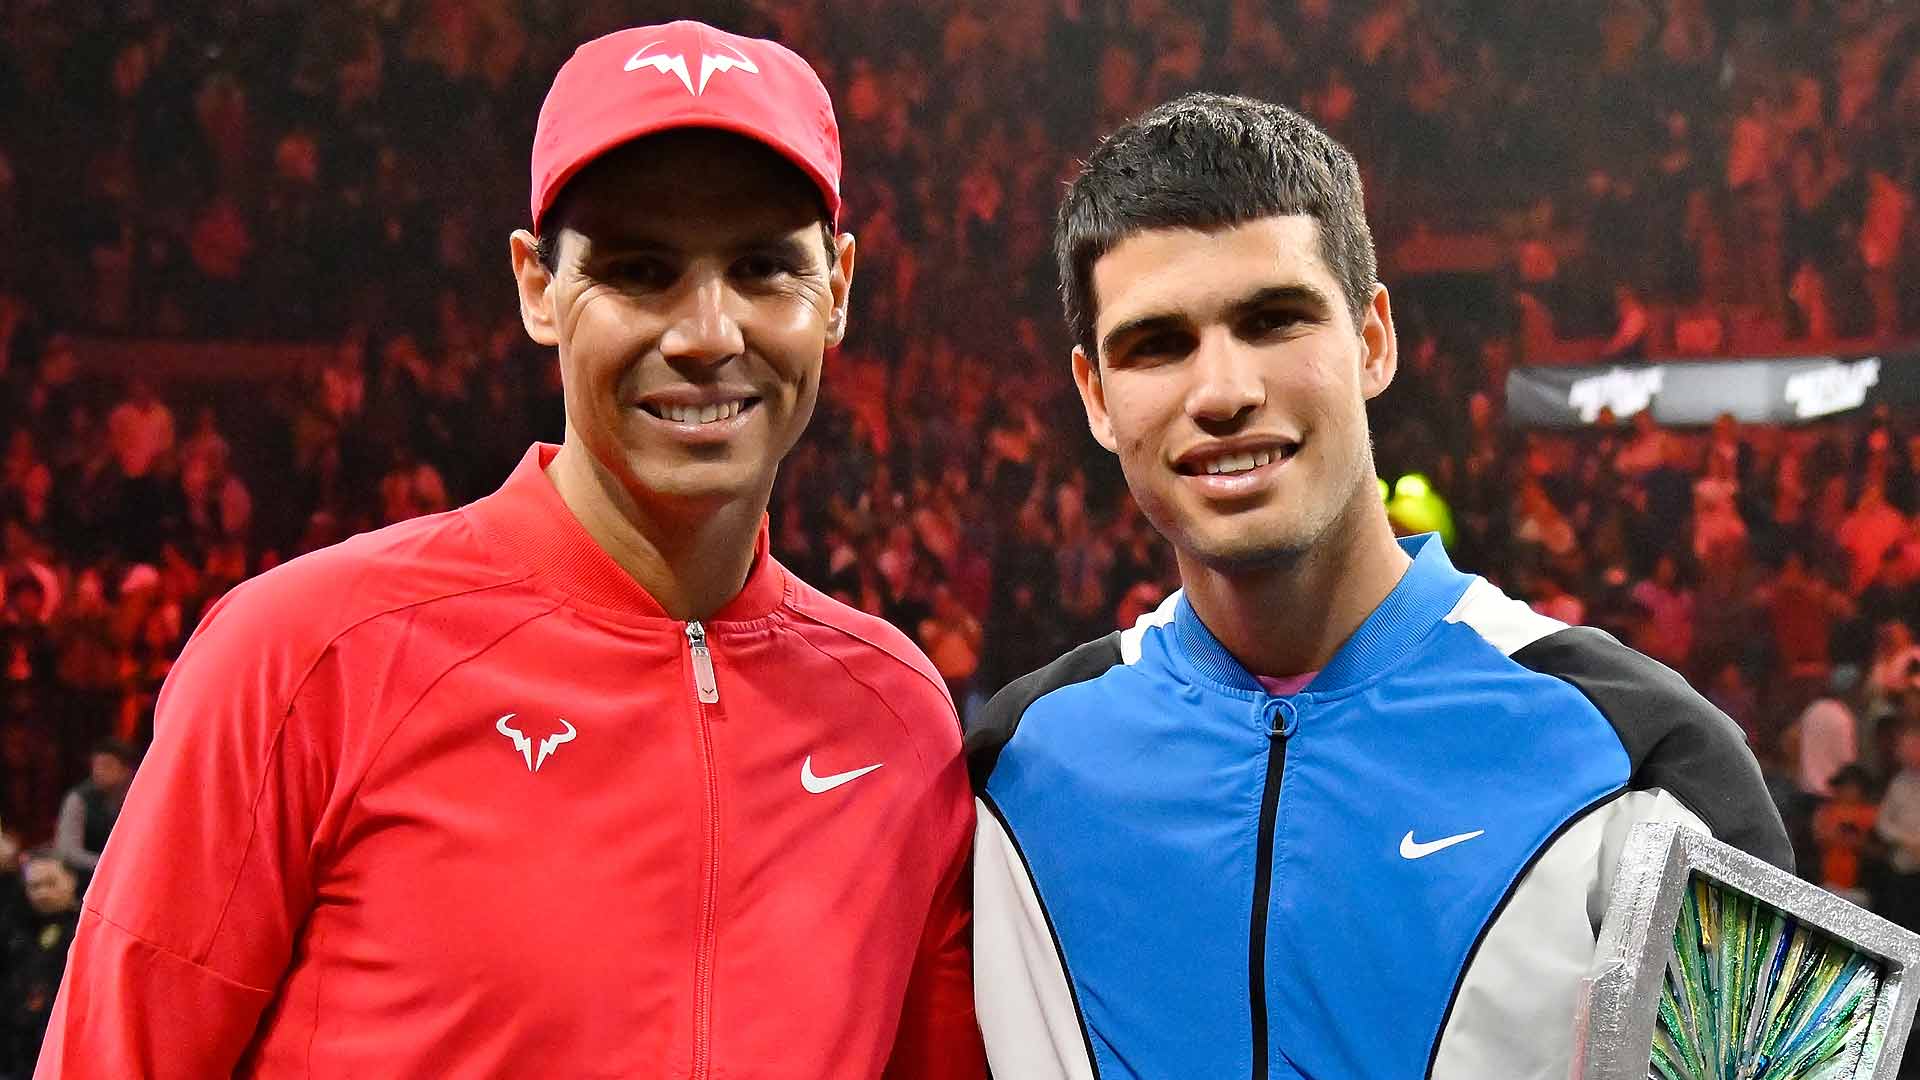 Rafael Nadal and Carlos Alcaraz will compete together in Paris.